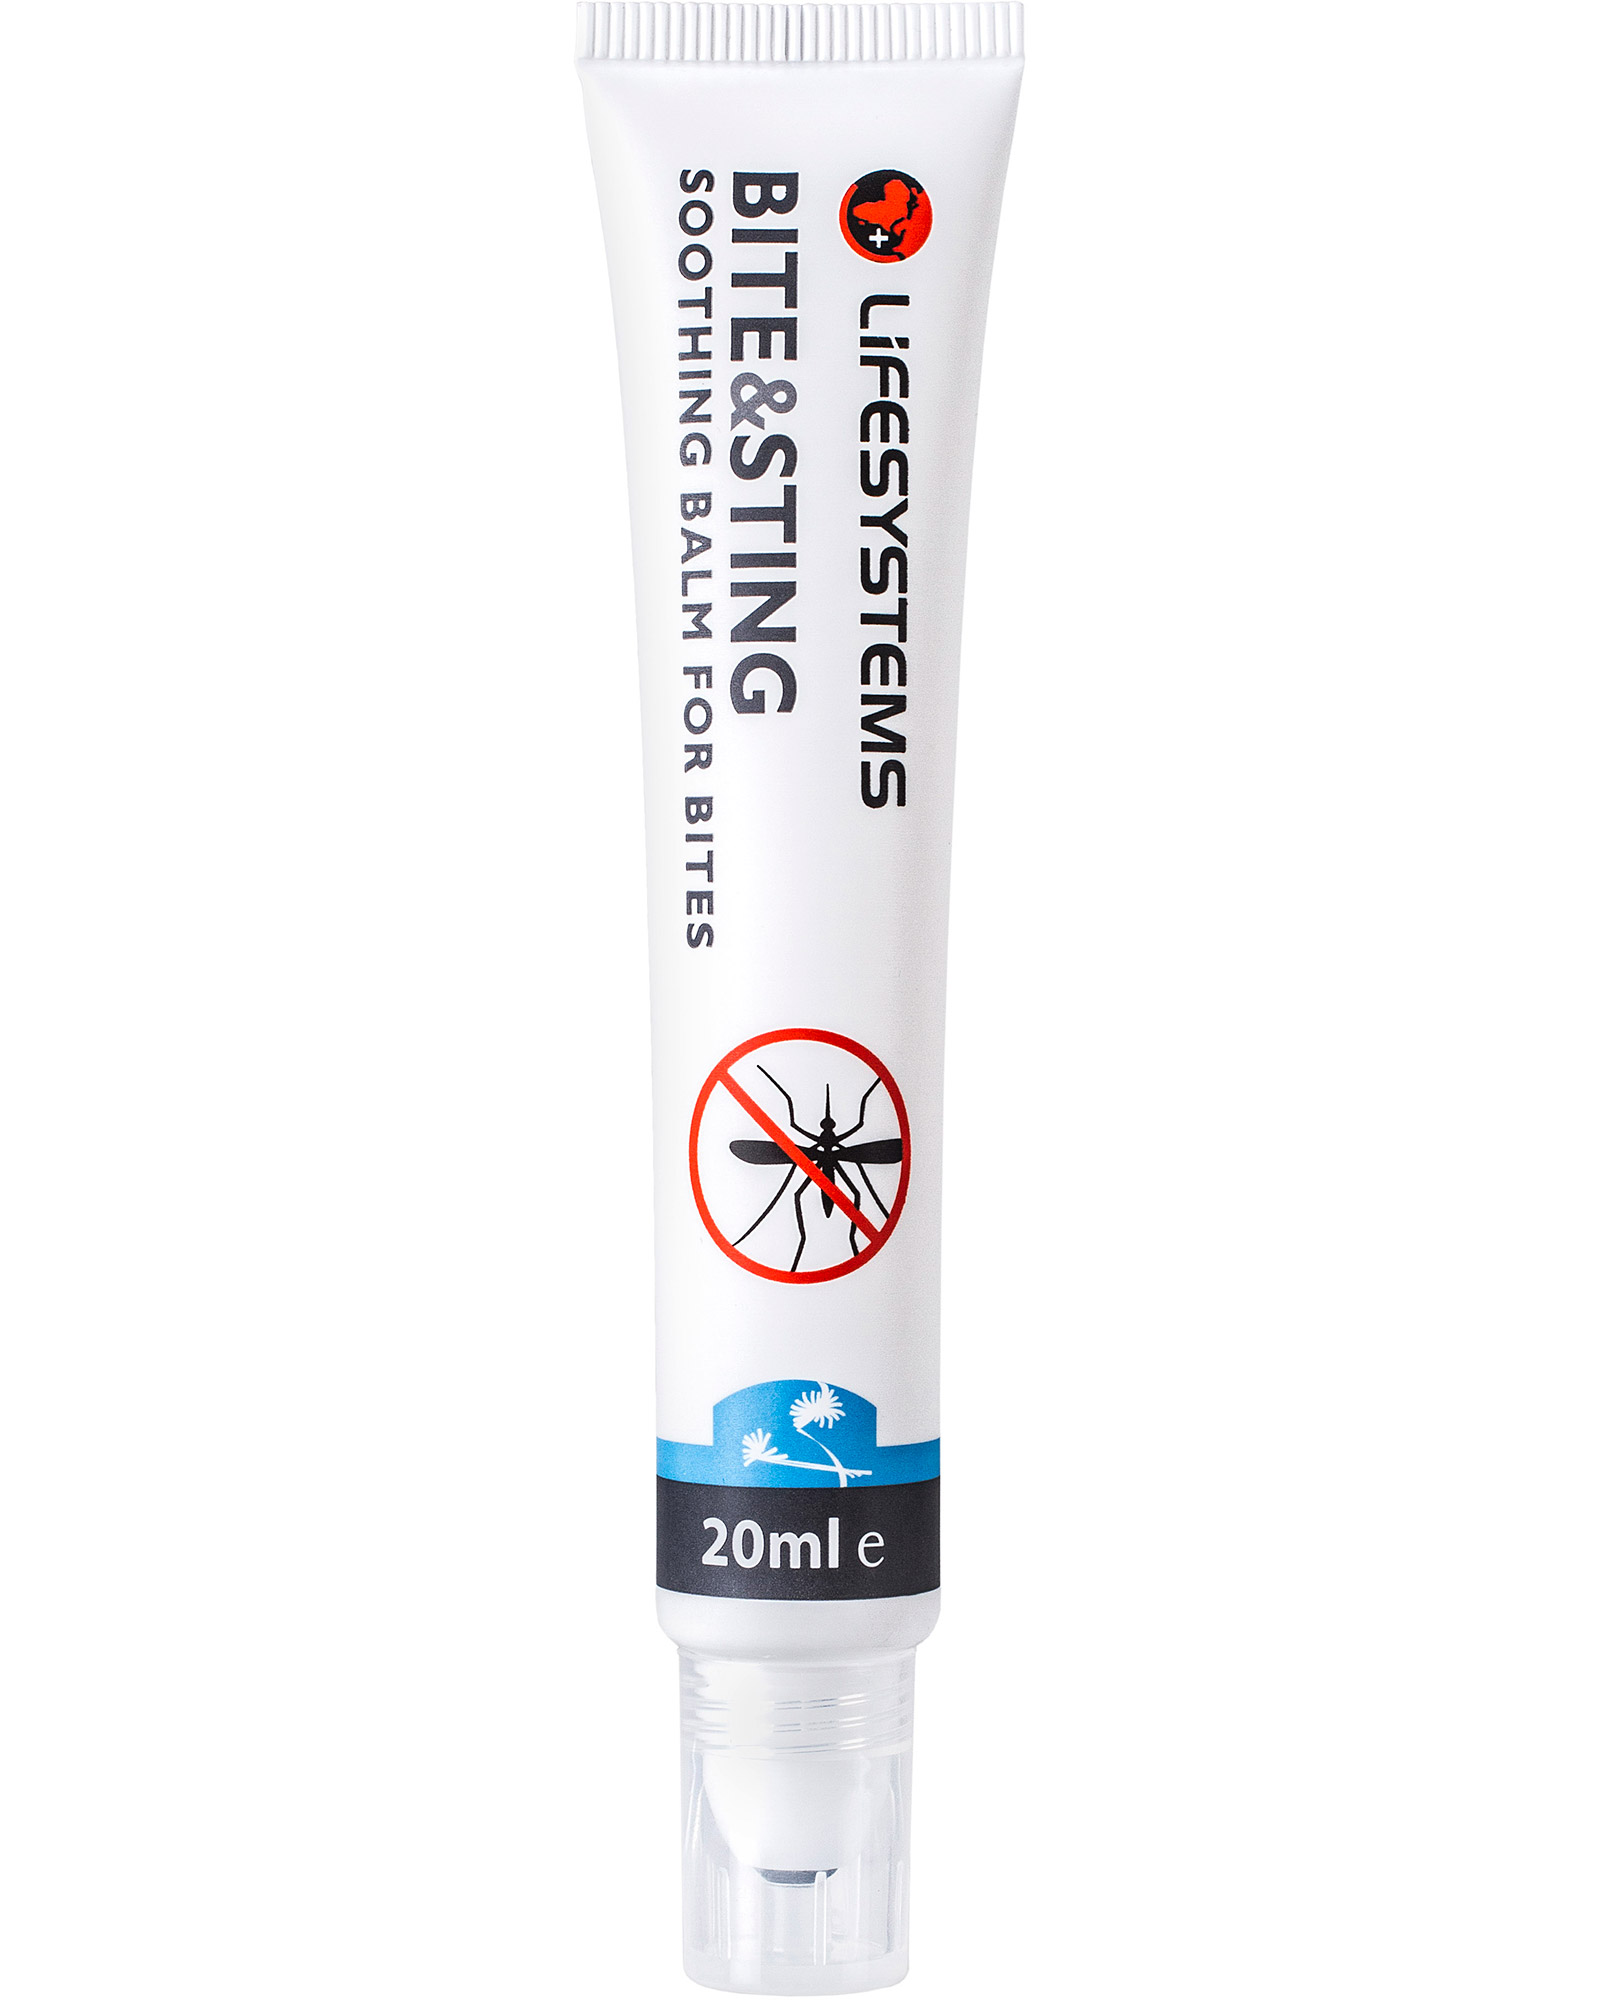 Lifesystems BiteandSting Relief Roll-on - 20ml